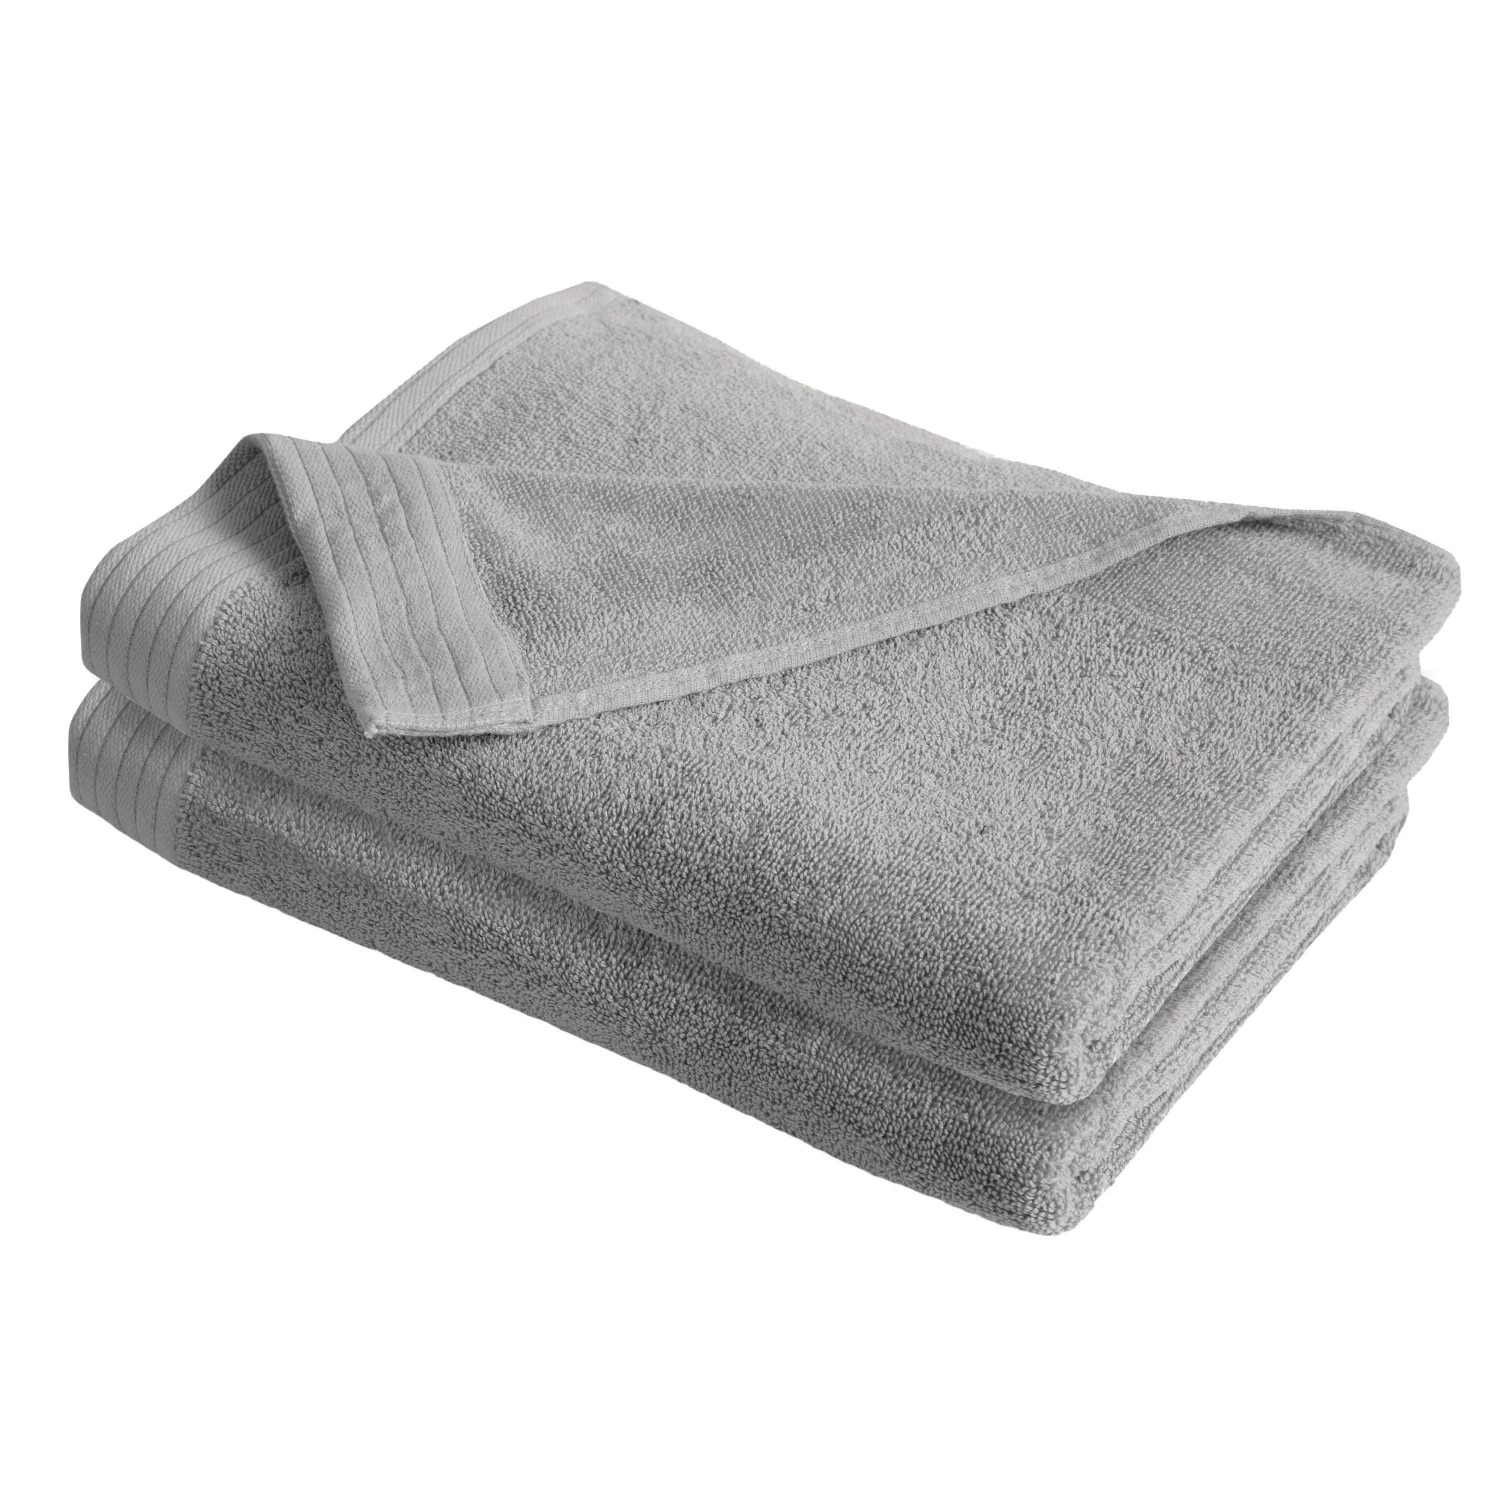 IzanStore - Soft and Plush Louis Vuitton Towel Set is a pure joy to the  touch Shop Now 🛒🛒🛒: . . . . #stayhome #staysafe  #bathtowel #towelset #absorbent #Soft #fastdrying #luxury #highquality #